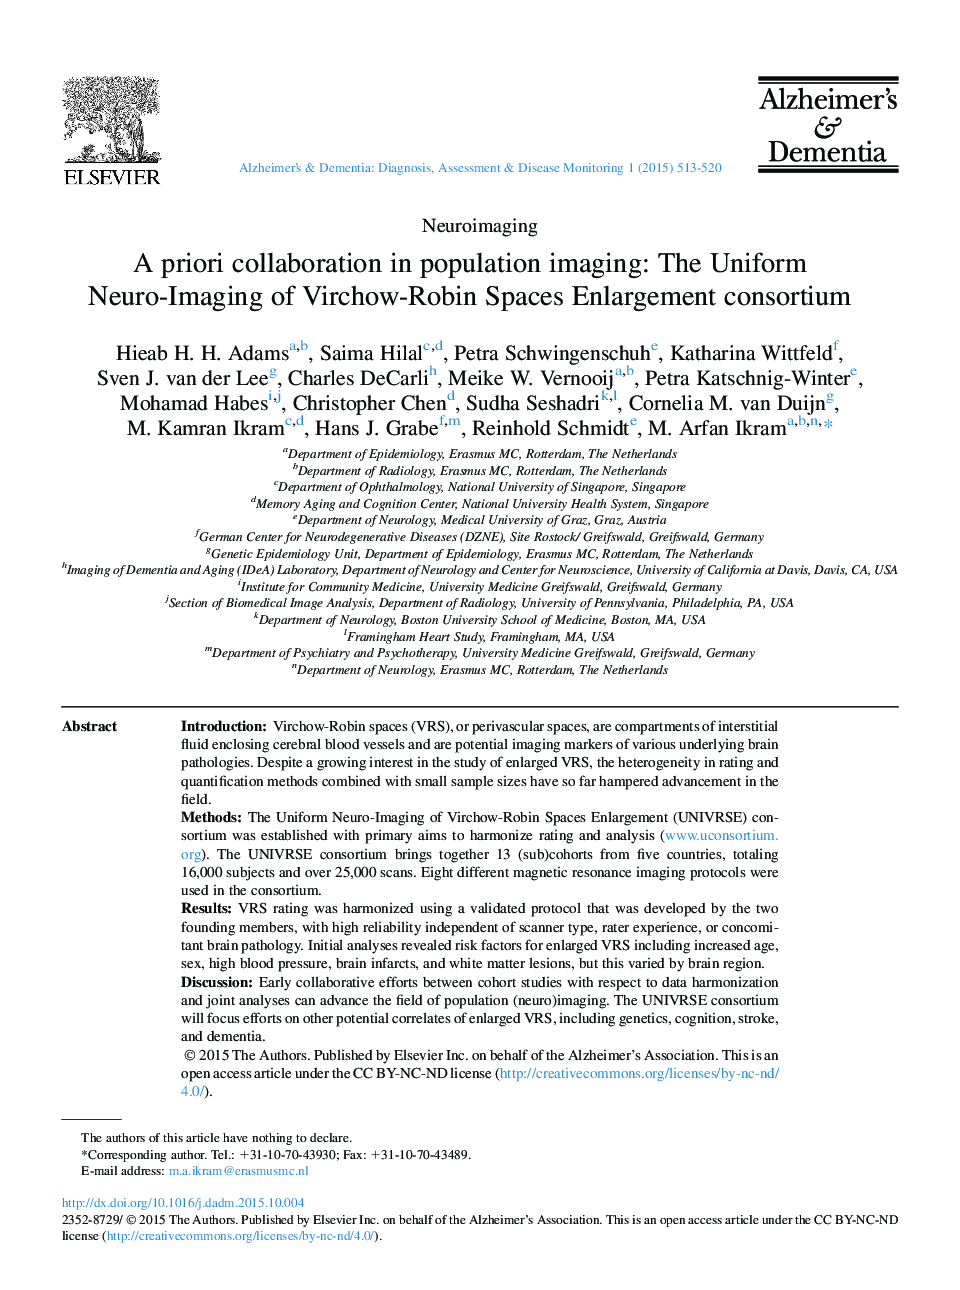 A priori collaboration in population imaging: The Uniform Neuro-Imaging of Virchow-Robin Spaces Enlargement consortium 